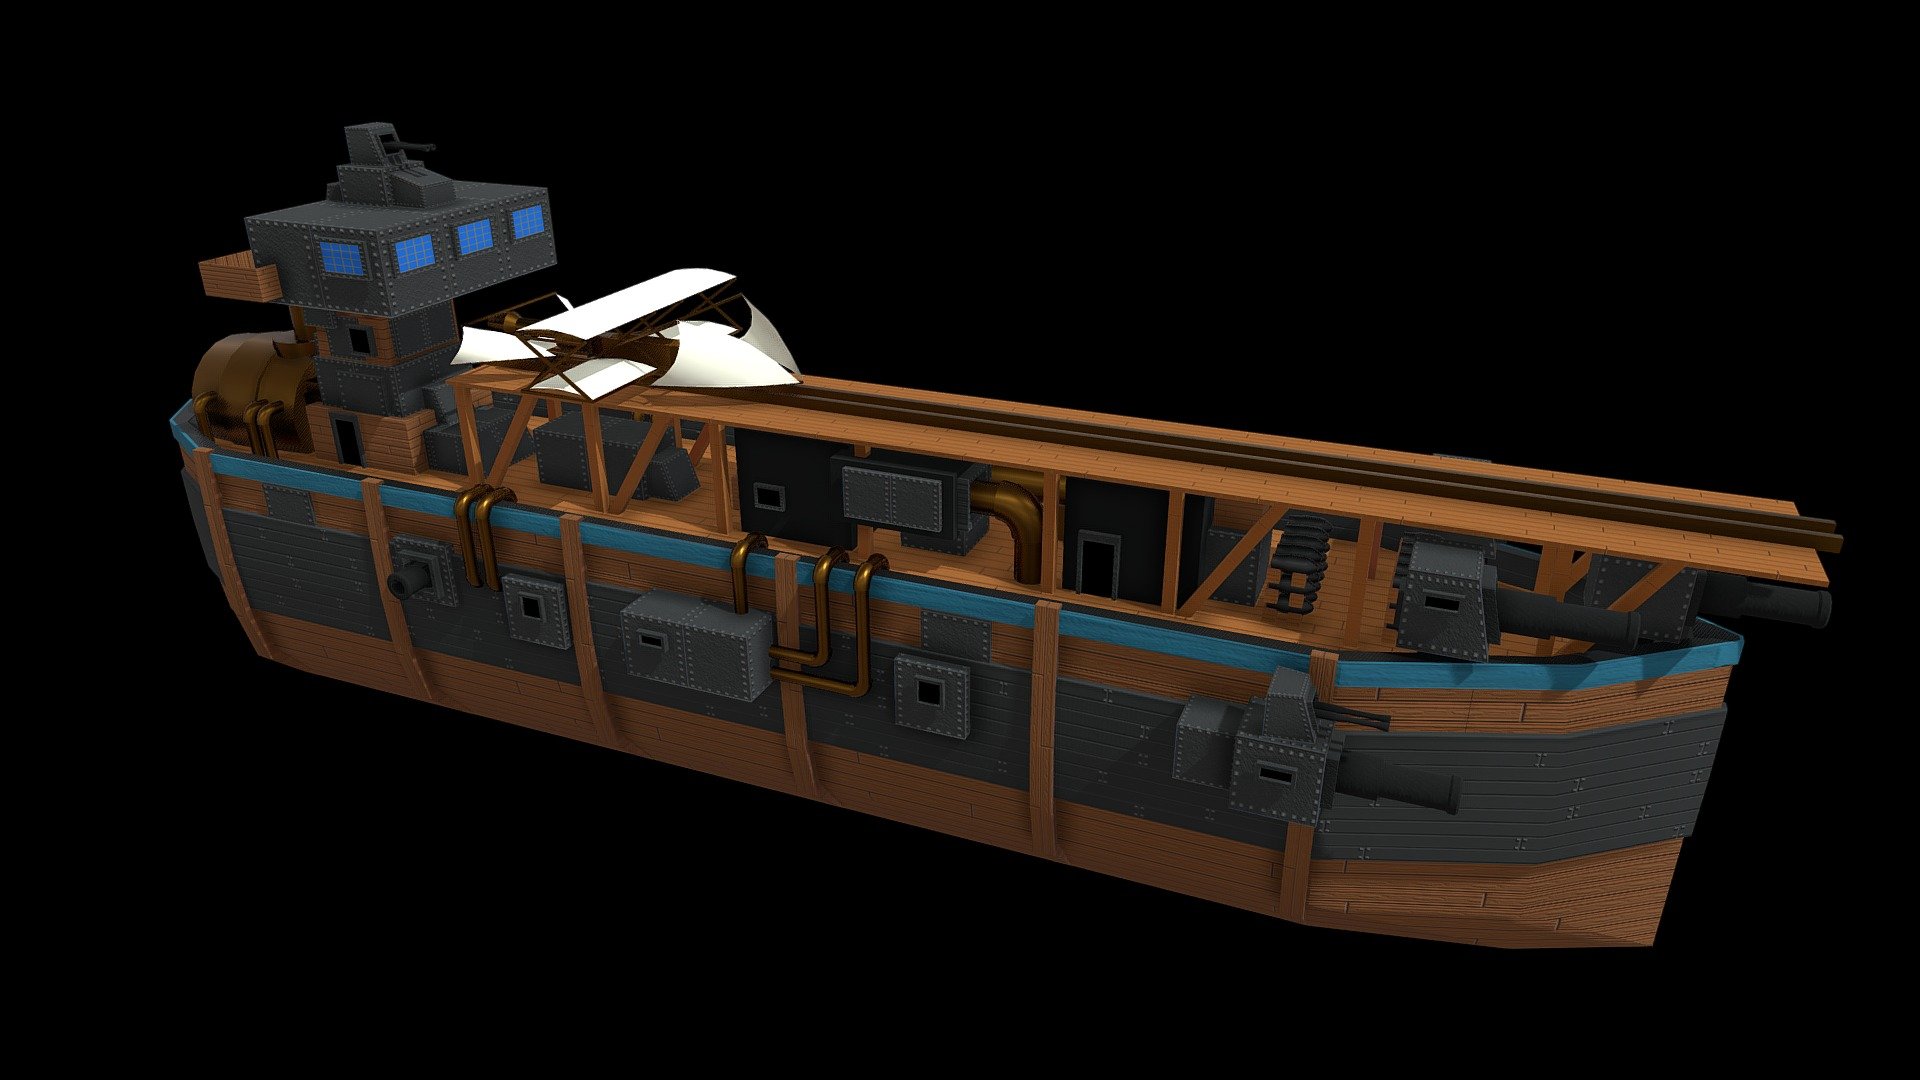 pre-1900s stylized war ship

-pathfinder war ship with a scoot glider 

-this is part of a collection of ships https://skfb.ly/oHOAO - Pathfinder war ship - Buy Royalty Free 3D model by Randall_3D 3d model